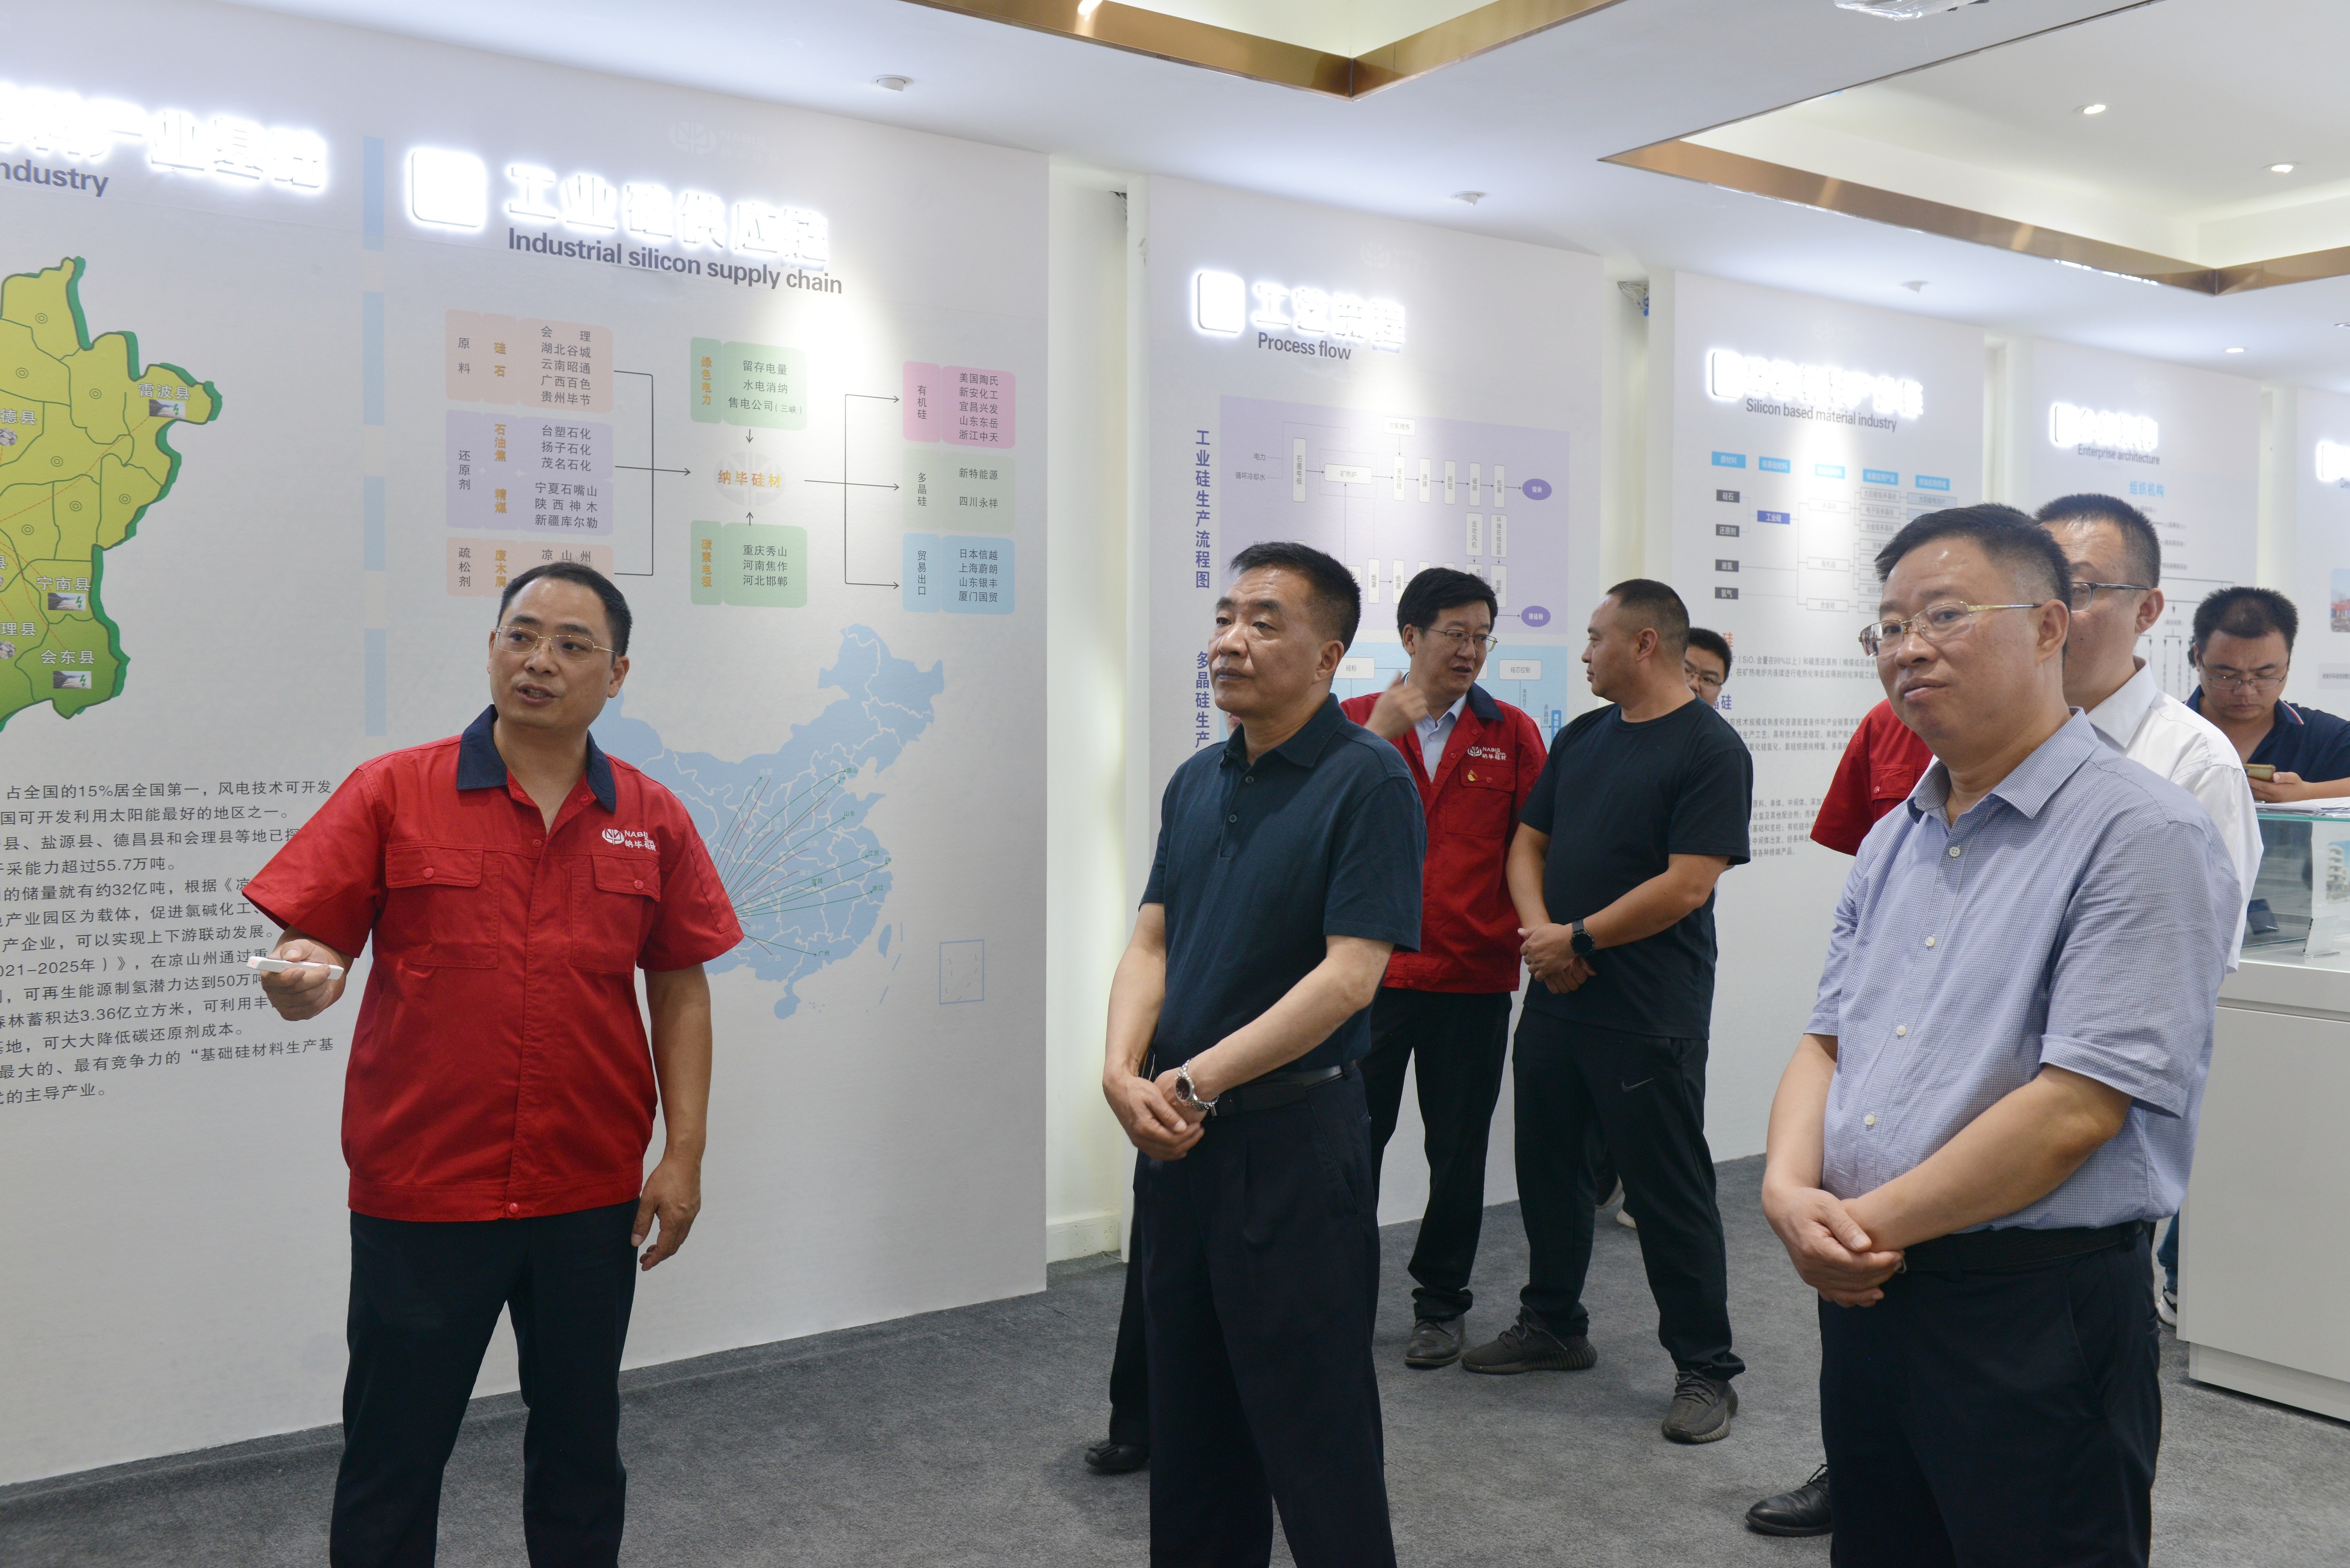 Liangshan state governor A Shi Labi to visit our division guidance work